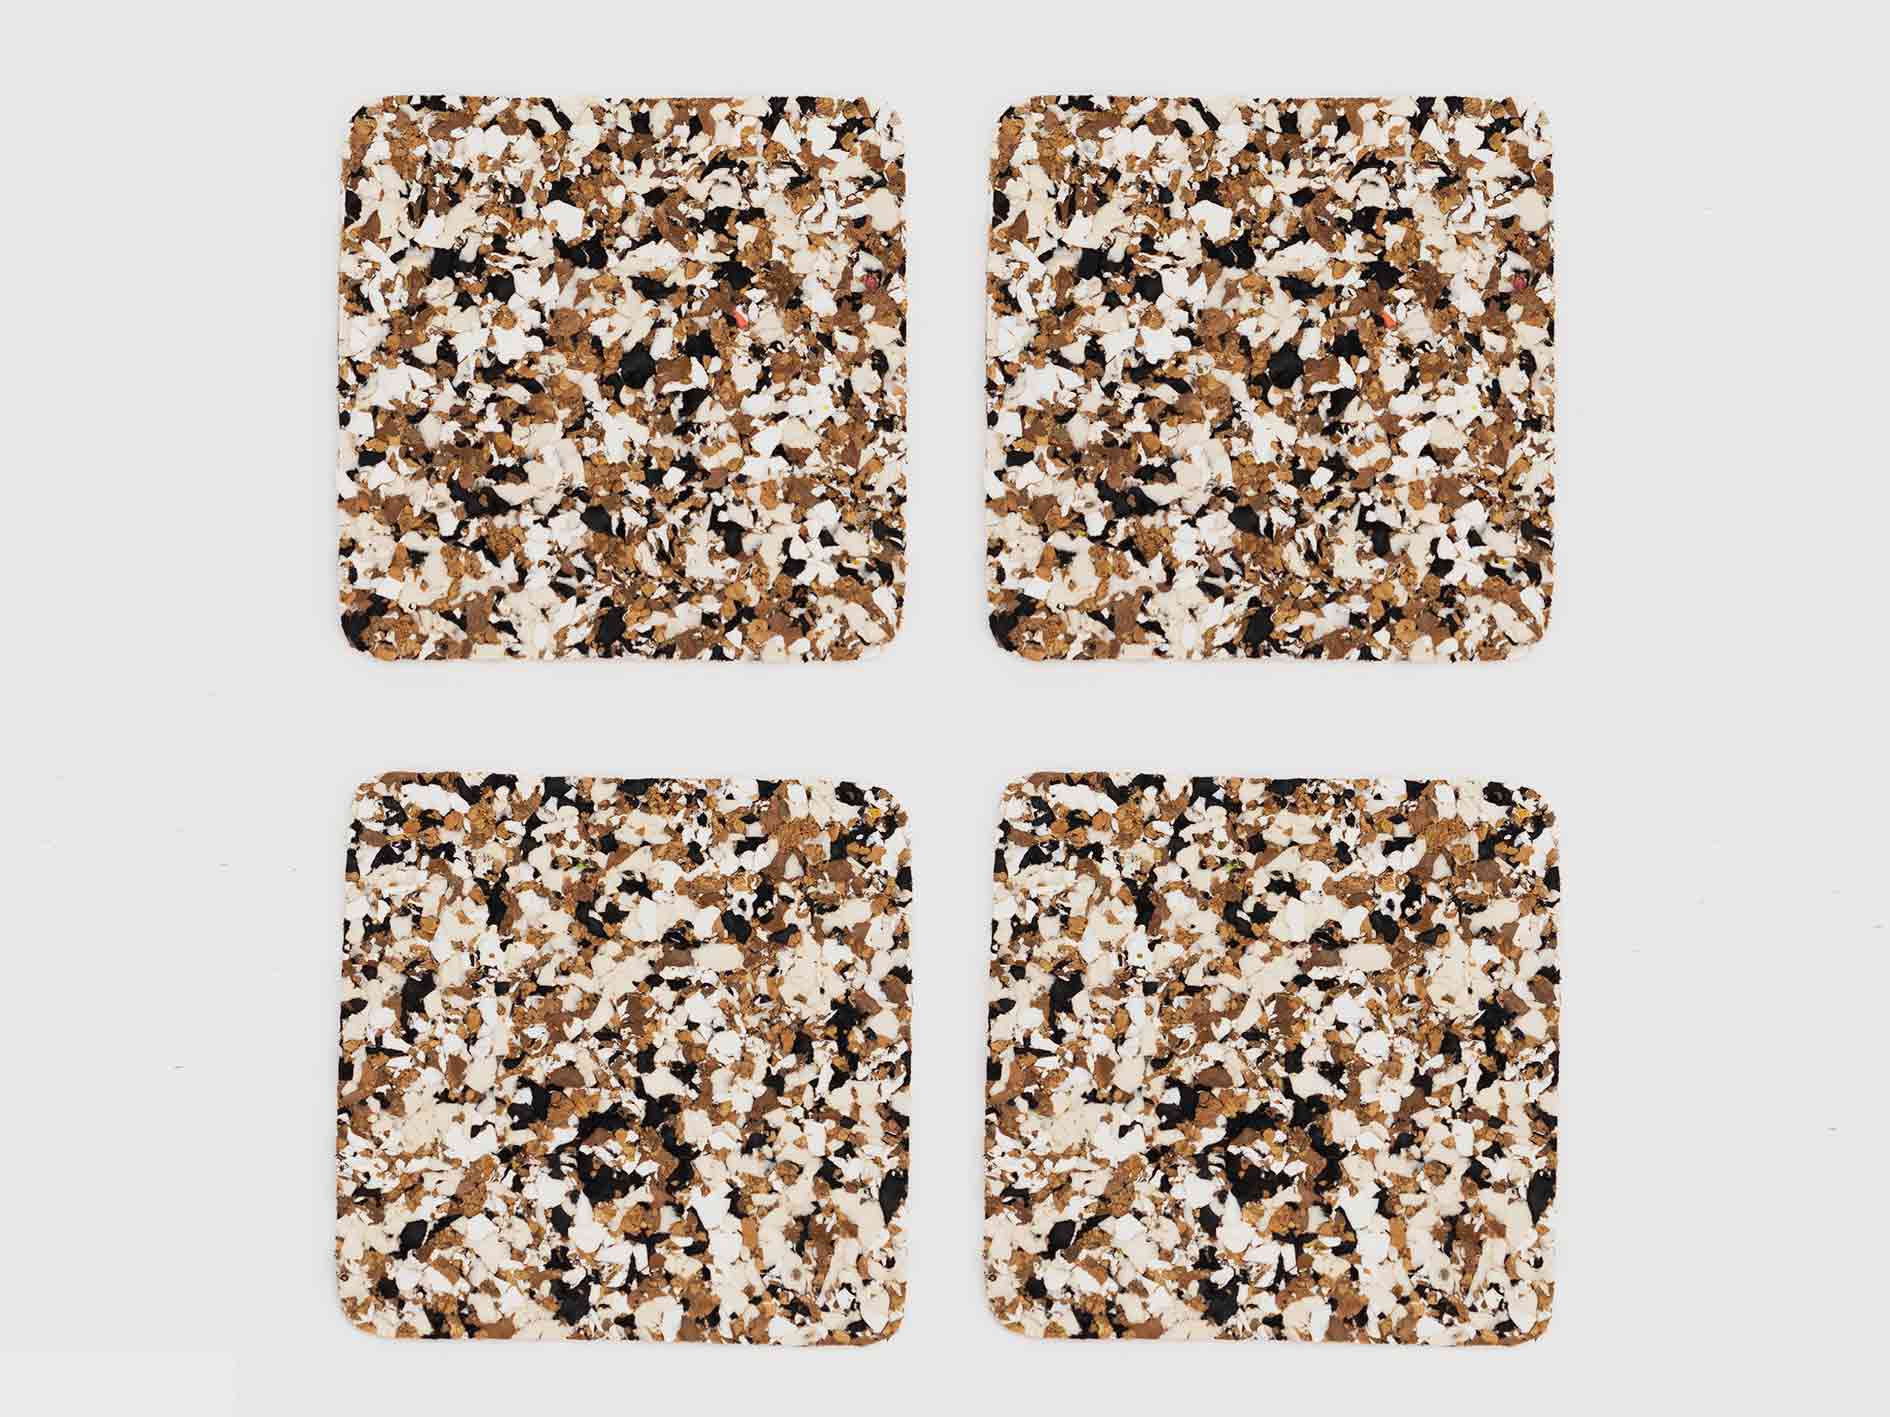 yod and co square cork coasters in black, white and cork